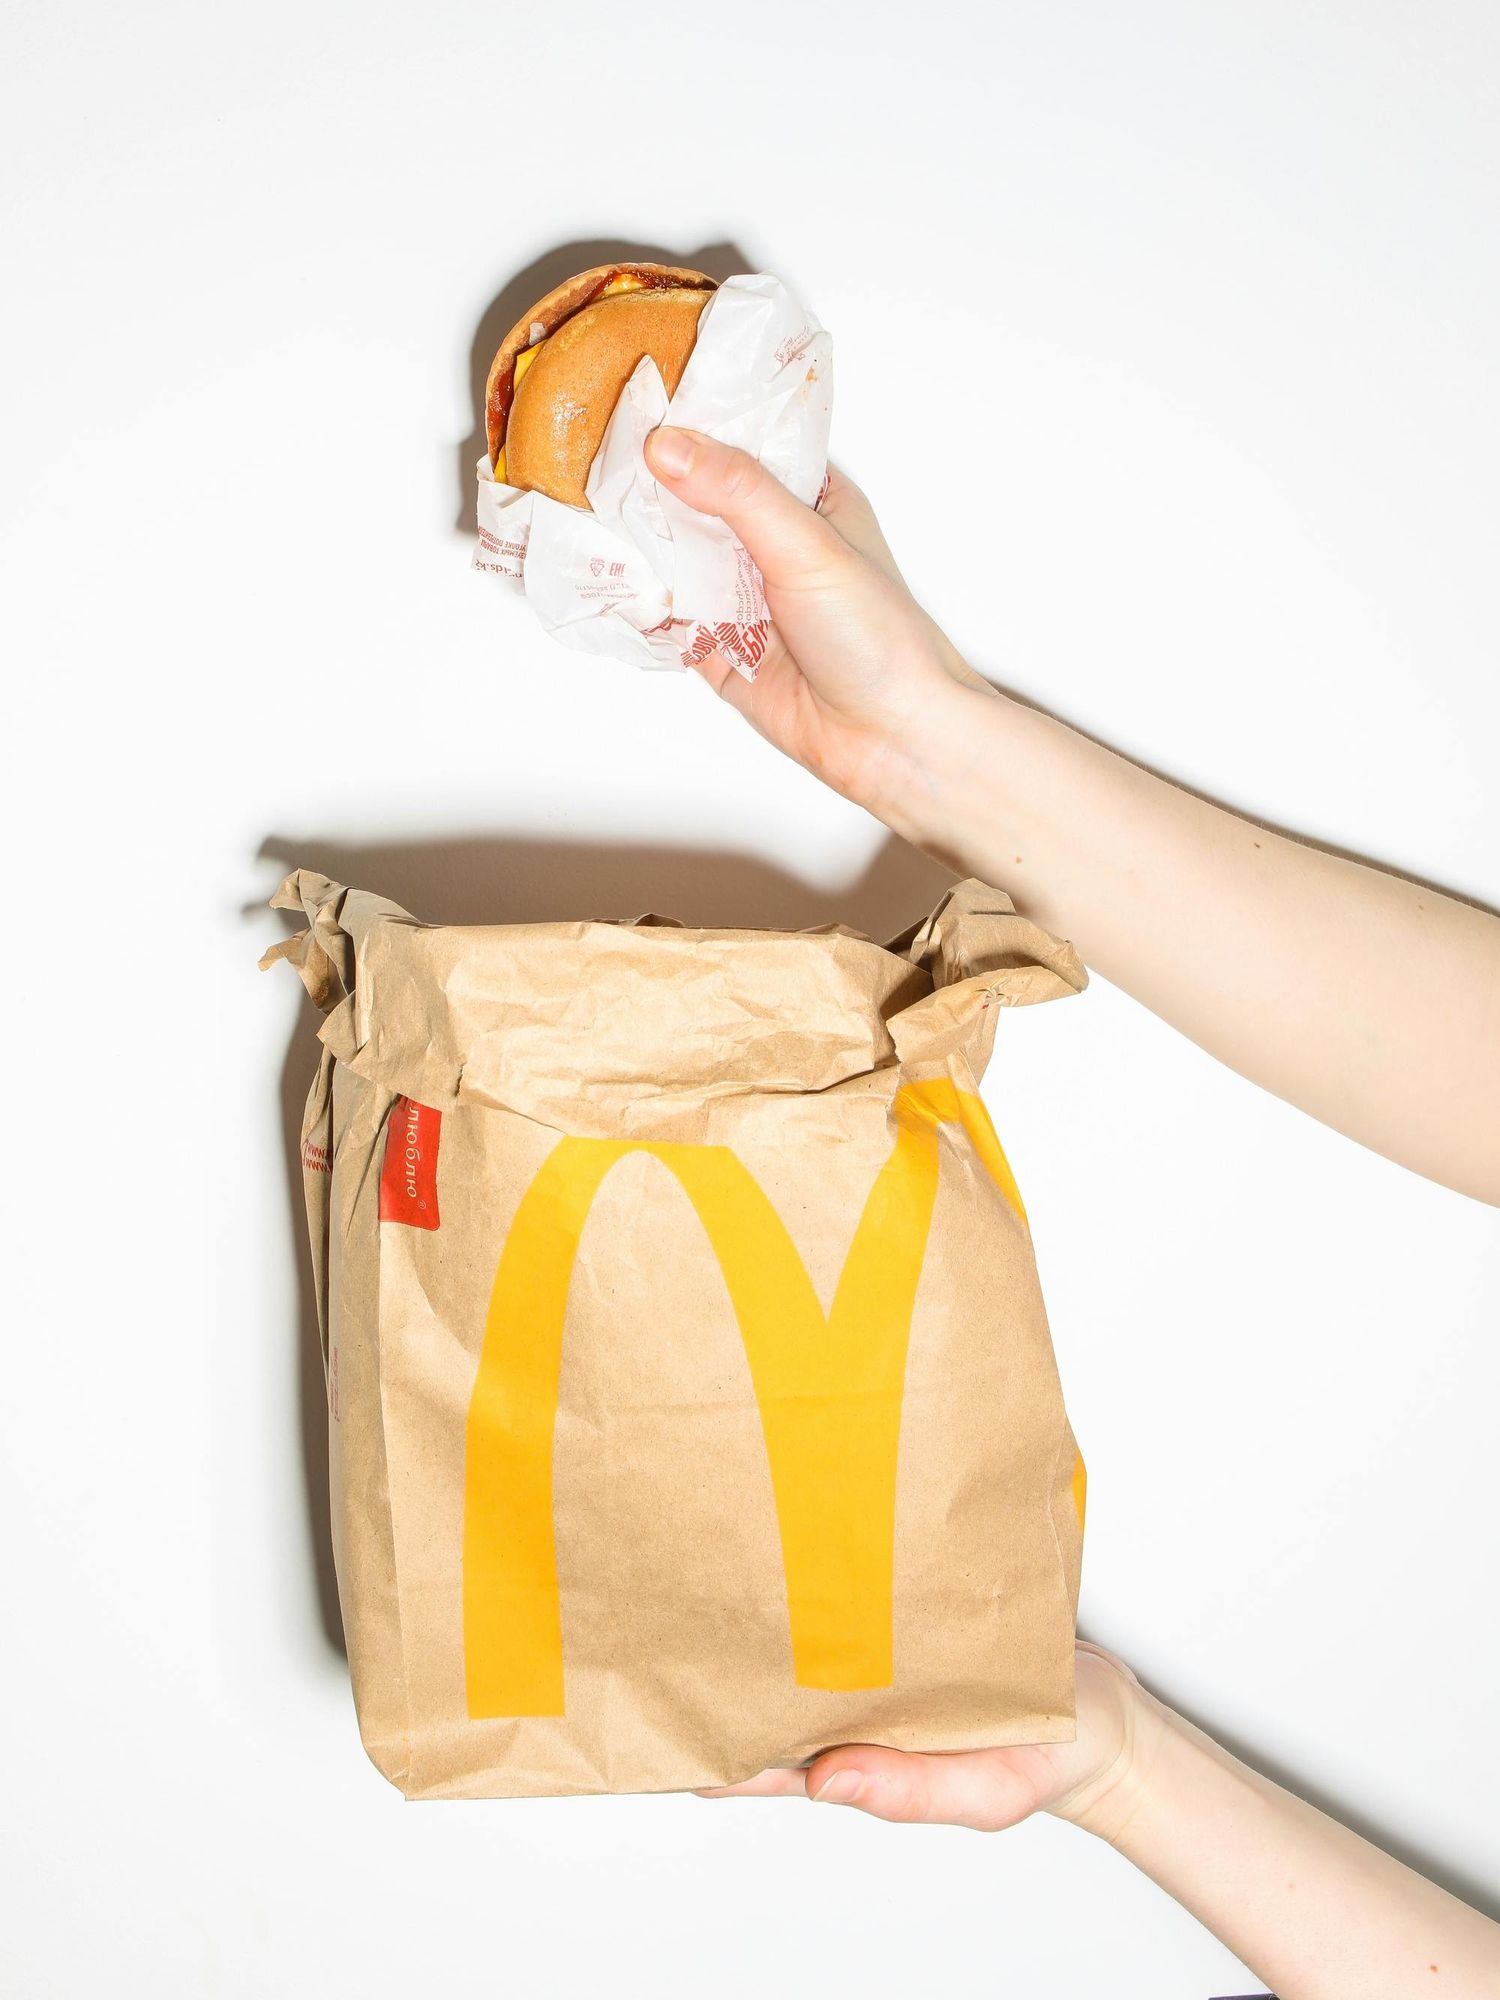 Is there a new McDonald's all-day breakfast menu?